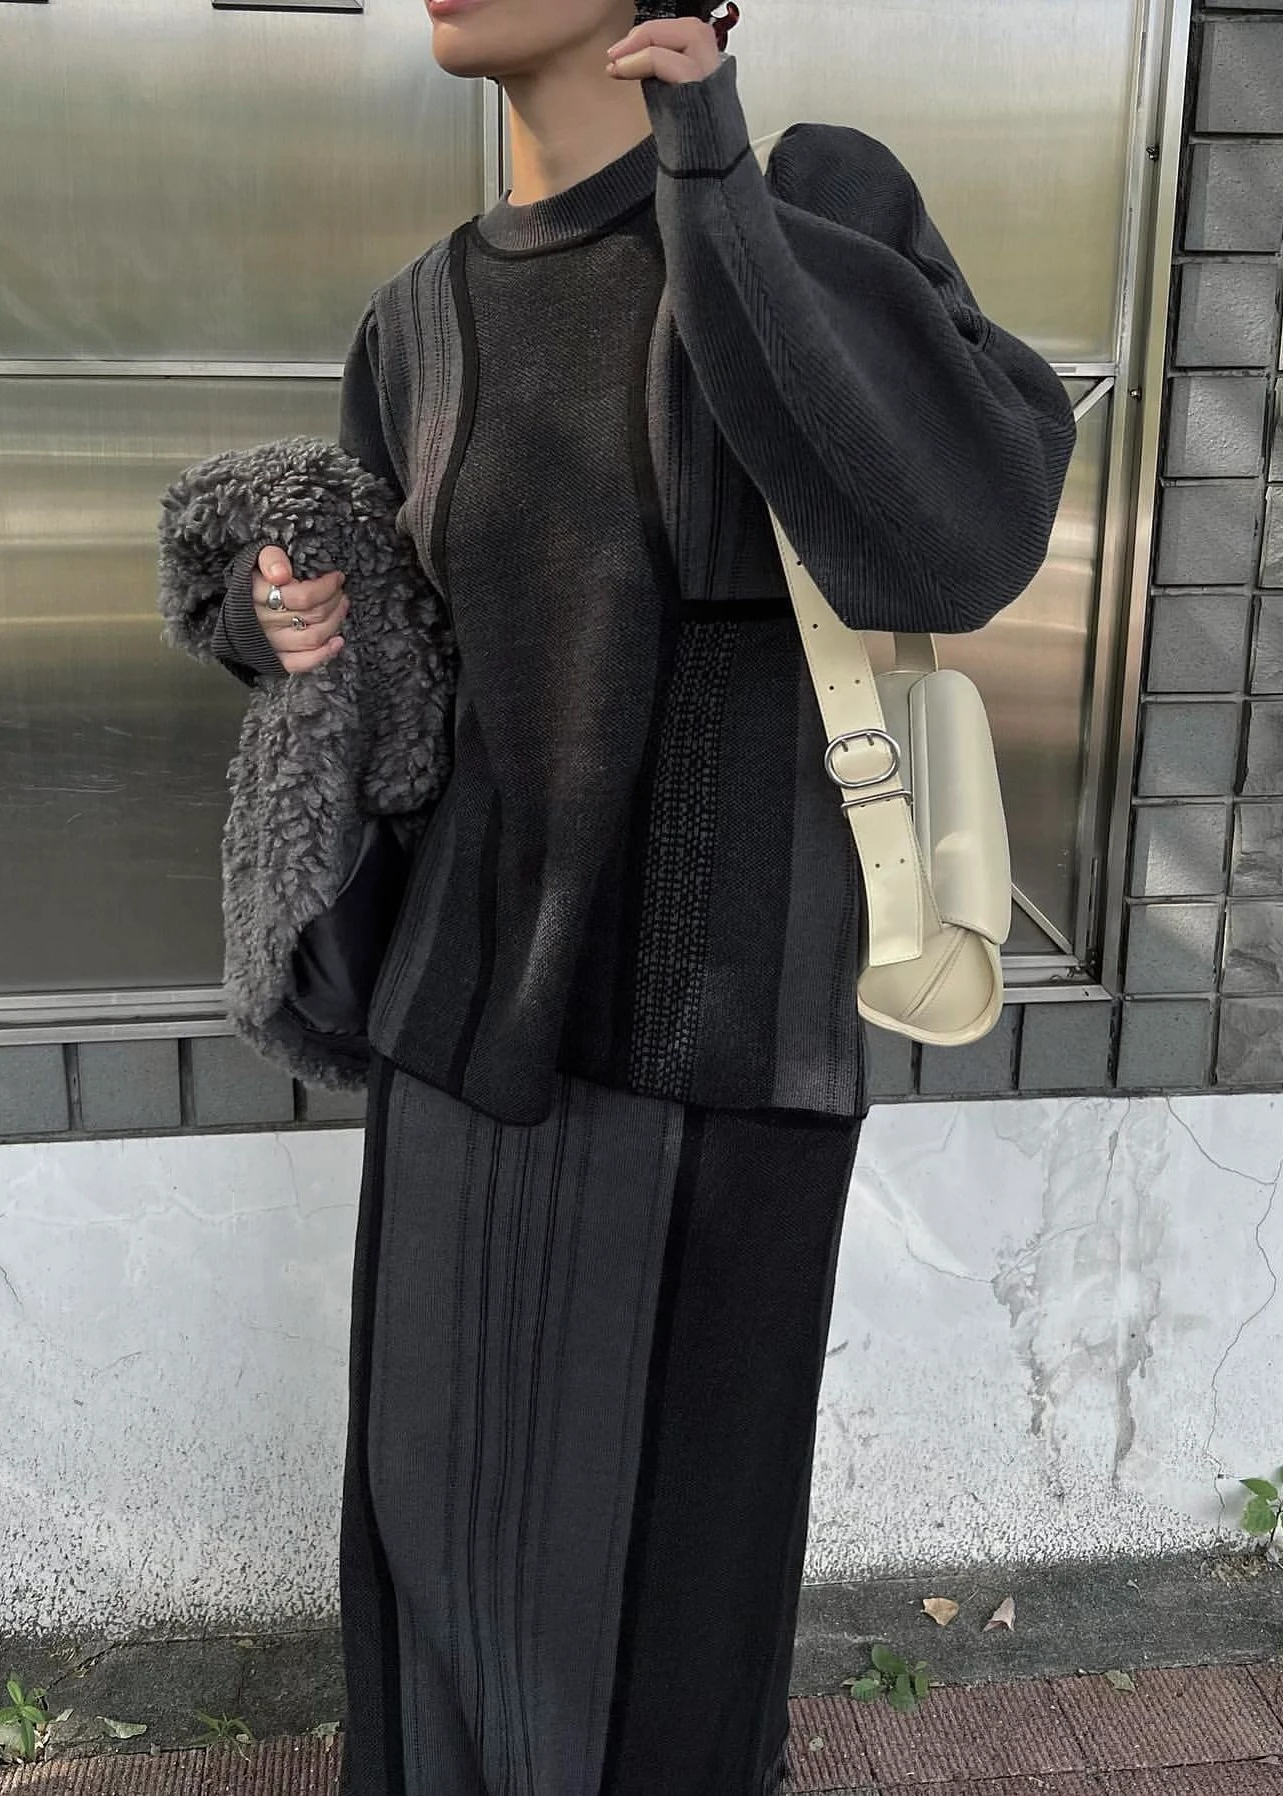 jacquard undulate placement knit / willfully（ウィルフリー）のknit